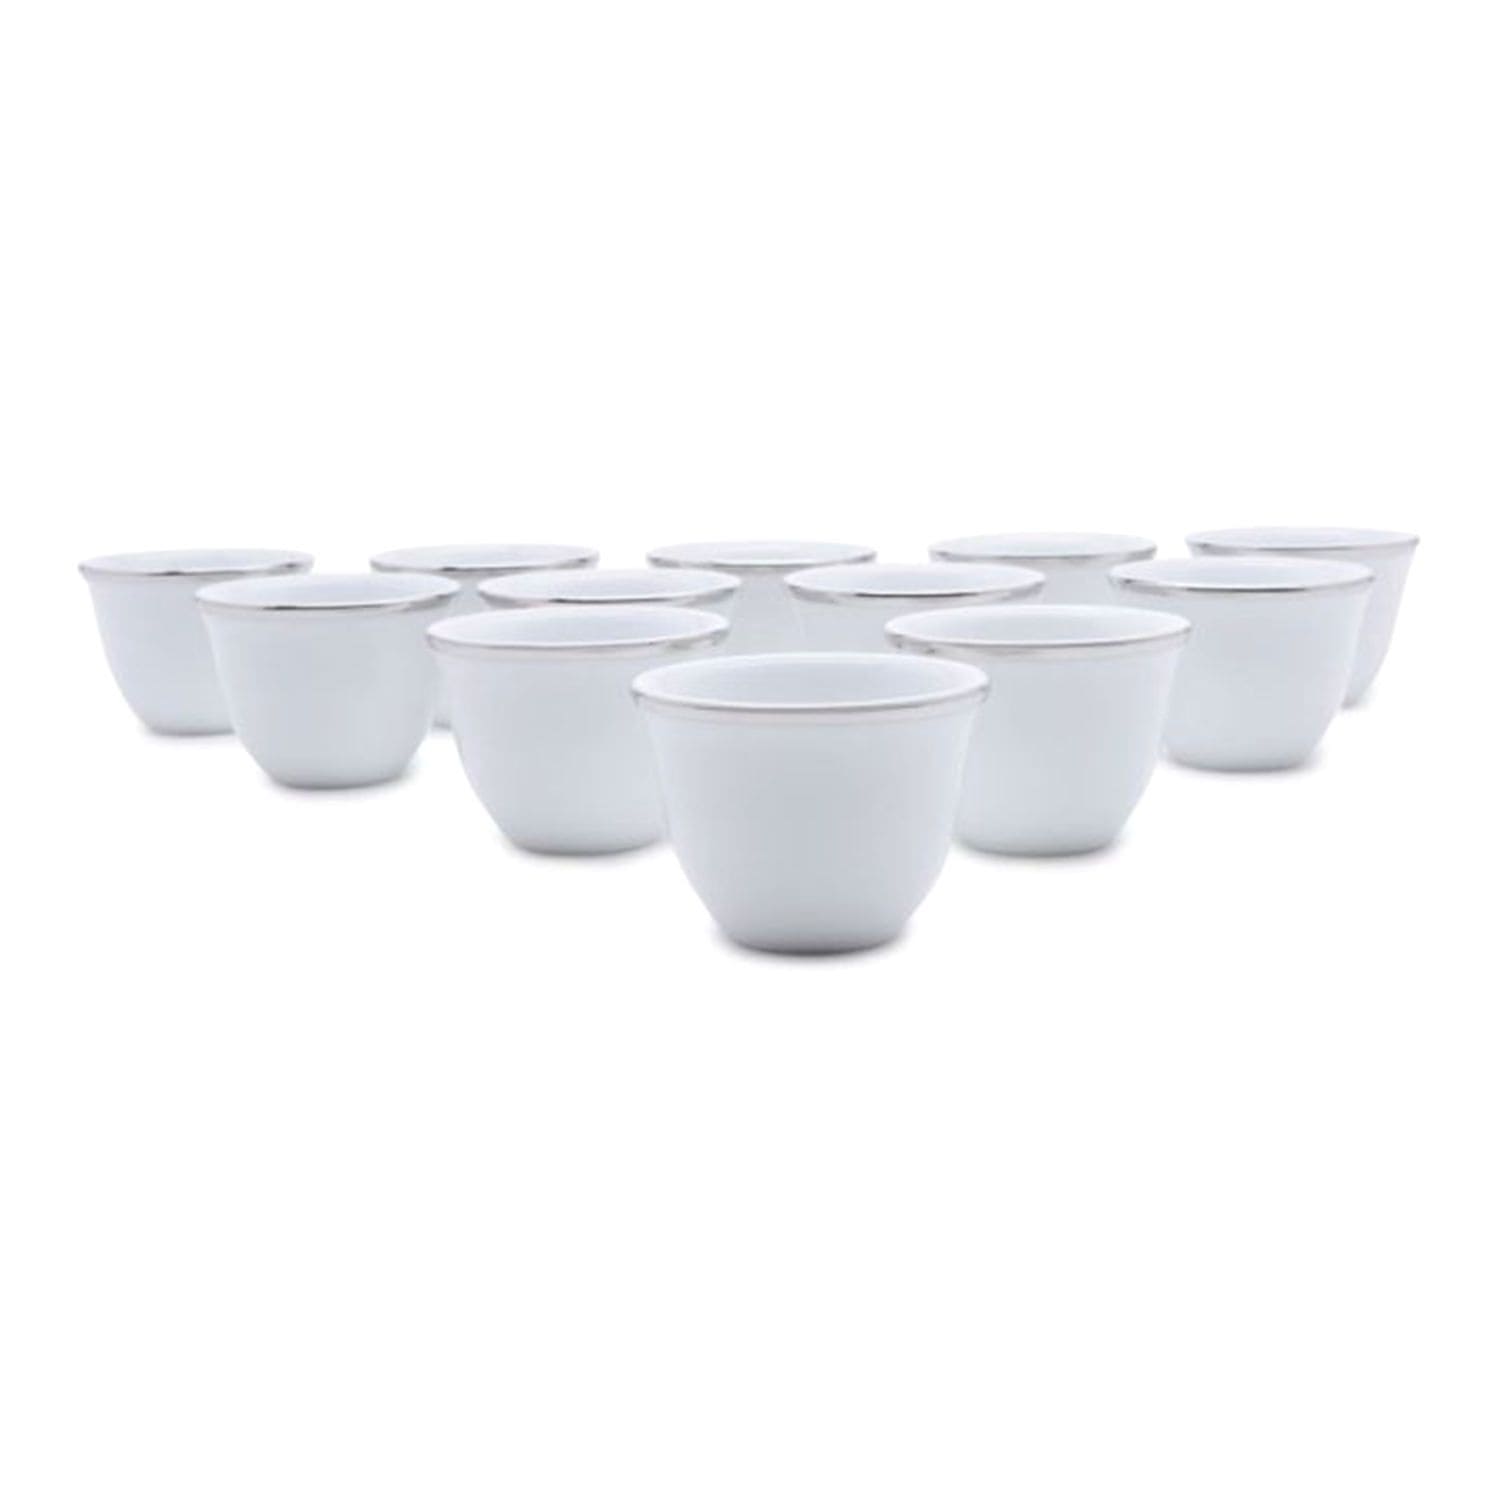 Dankotuwa Cawa Cup - White and Silver, Set of 12 - CCUPS - Jashanmal Home